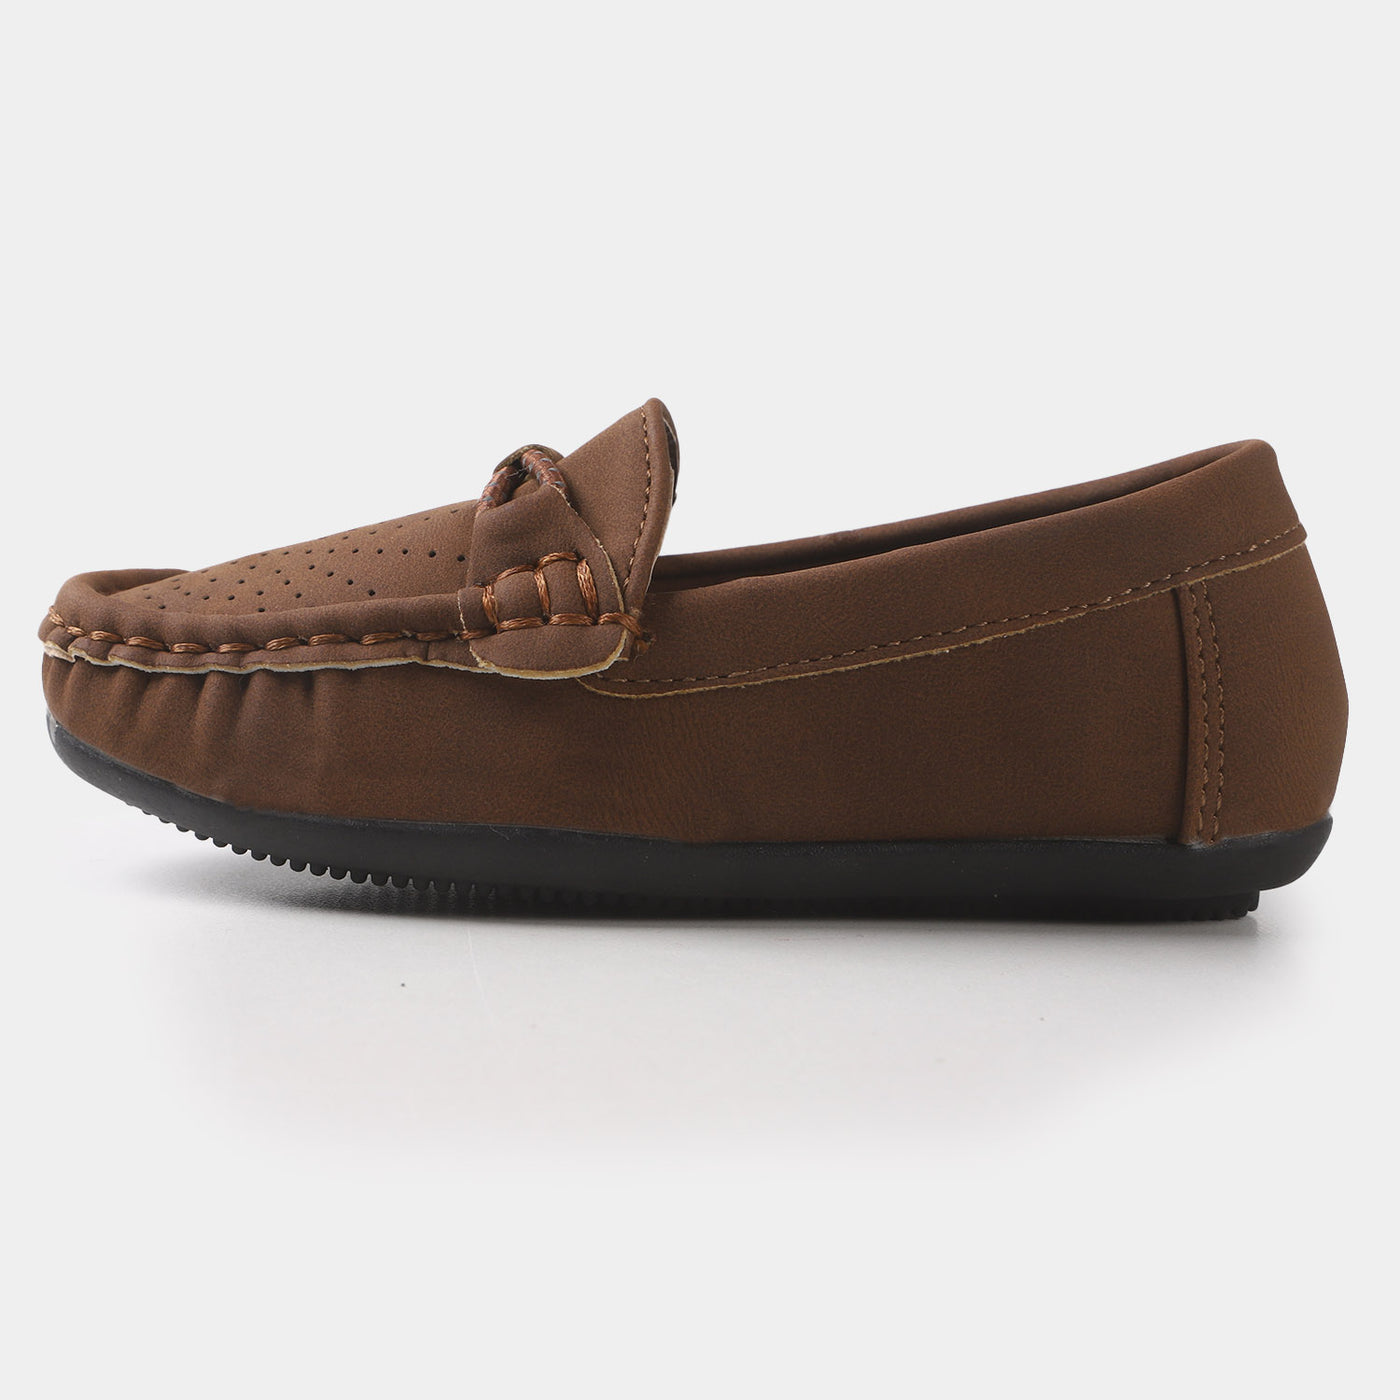 Boys loafers 202109-6 - BROWN